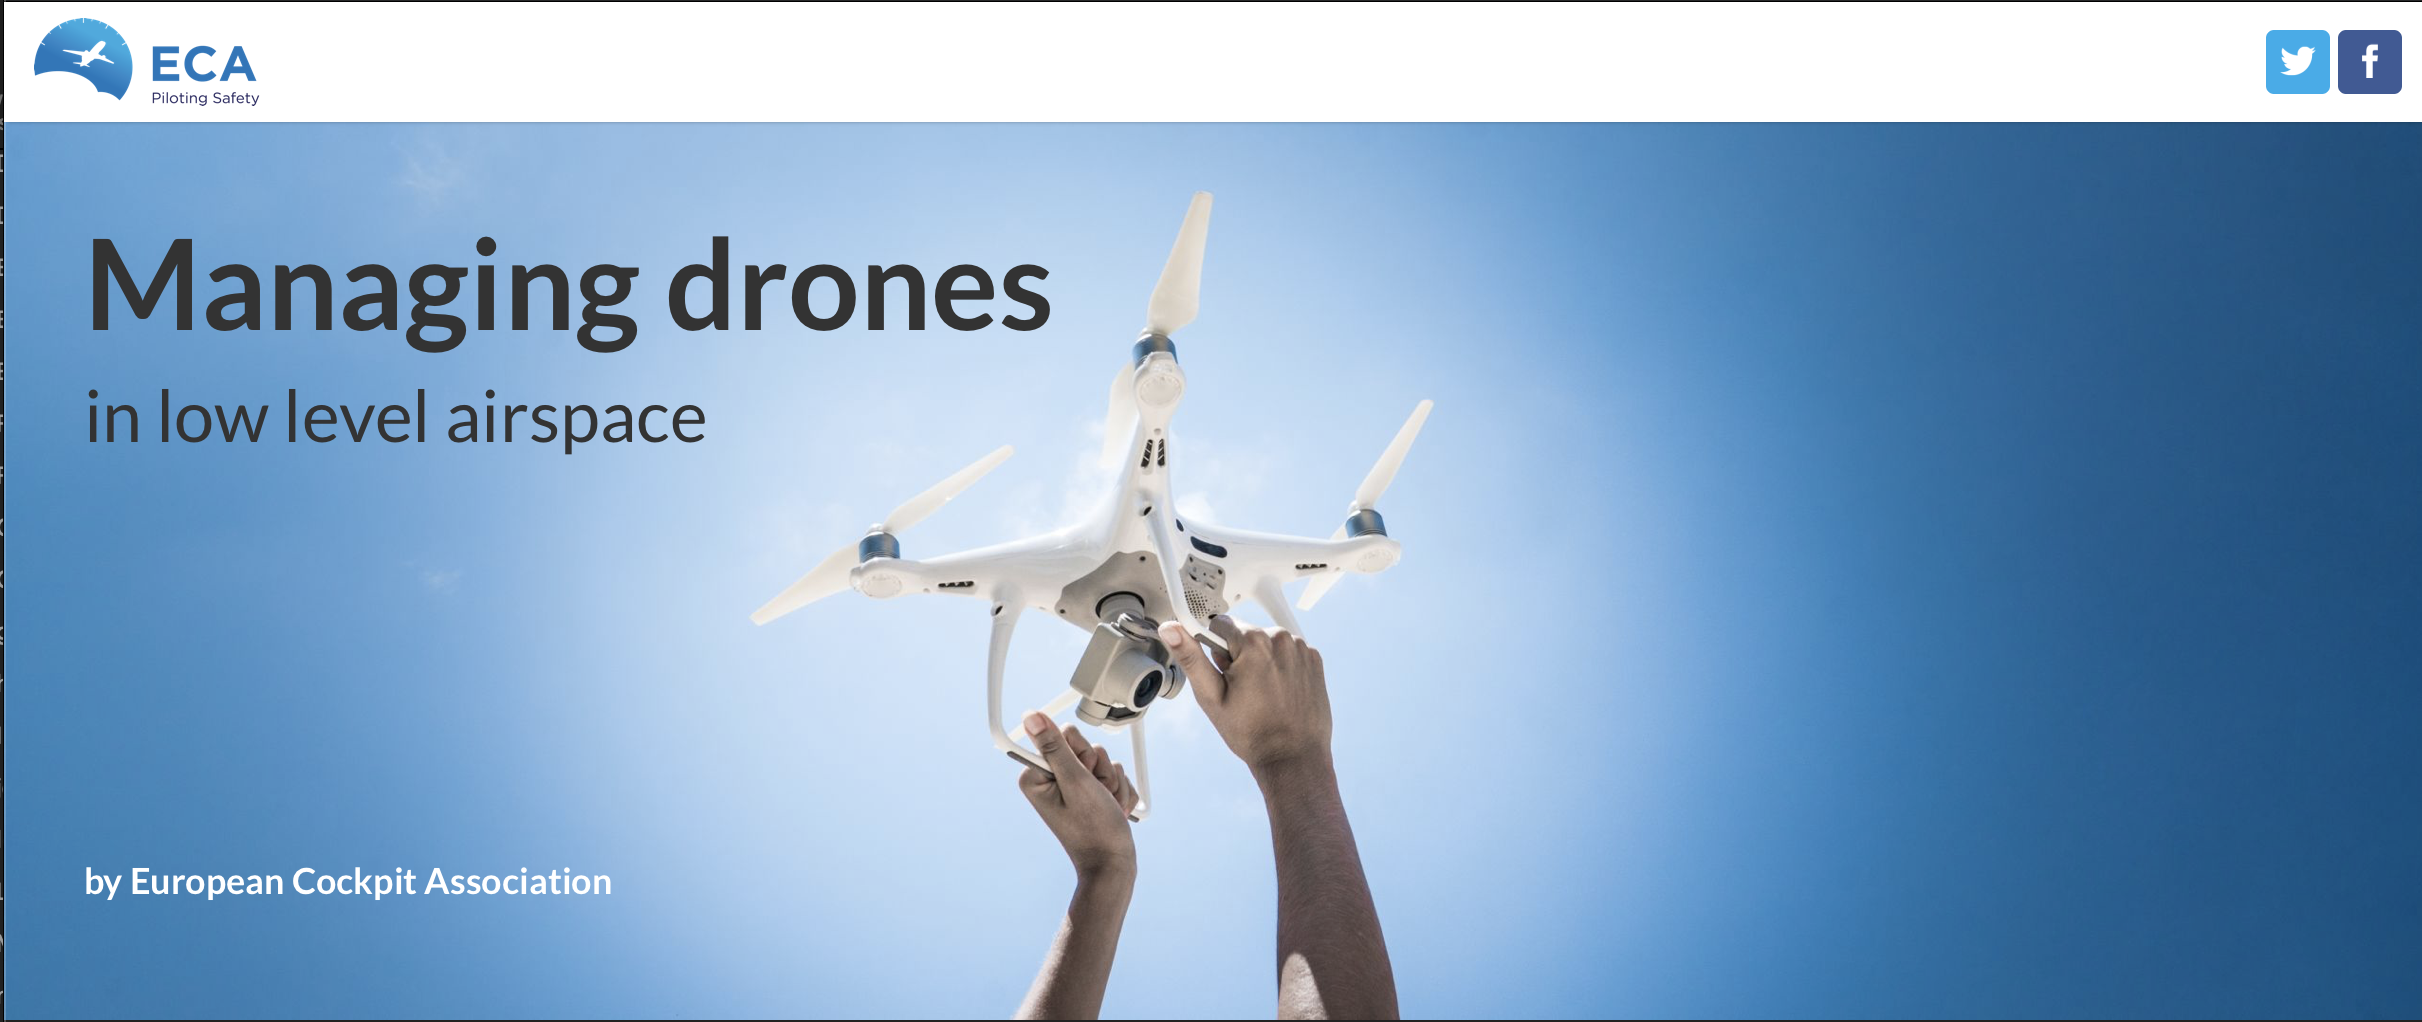 Managing drones in low level airspace